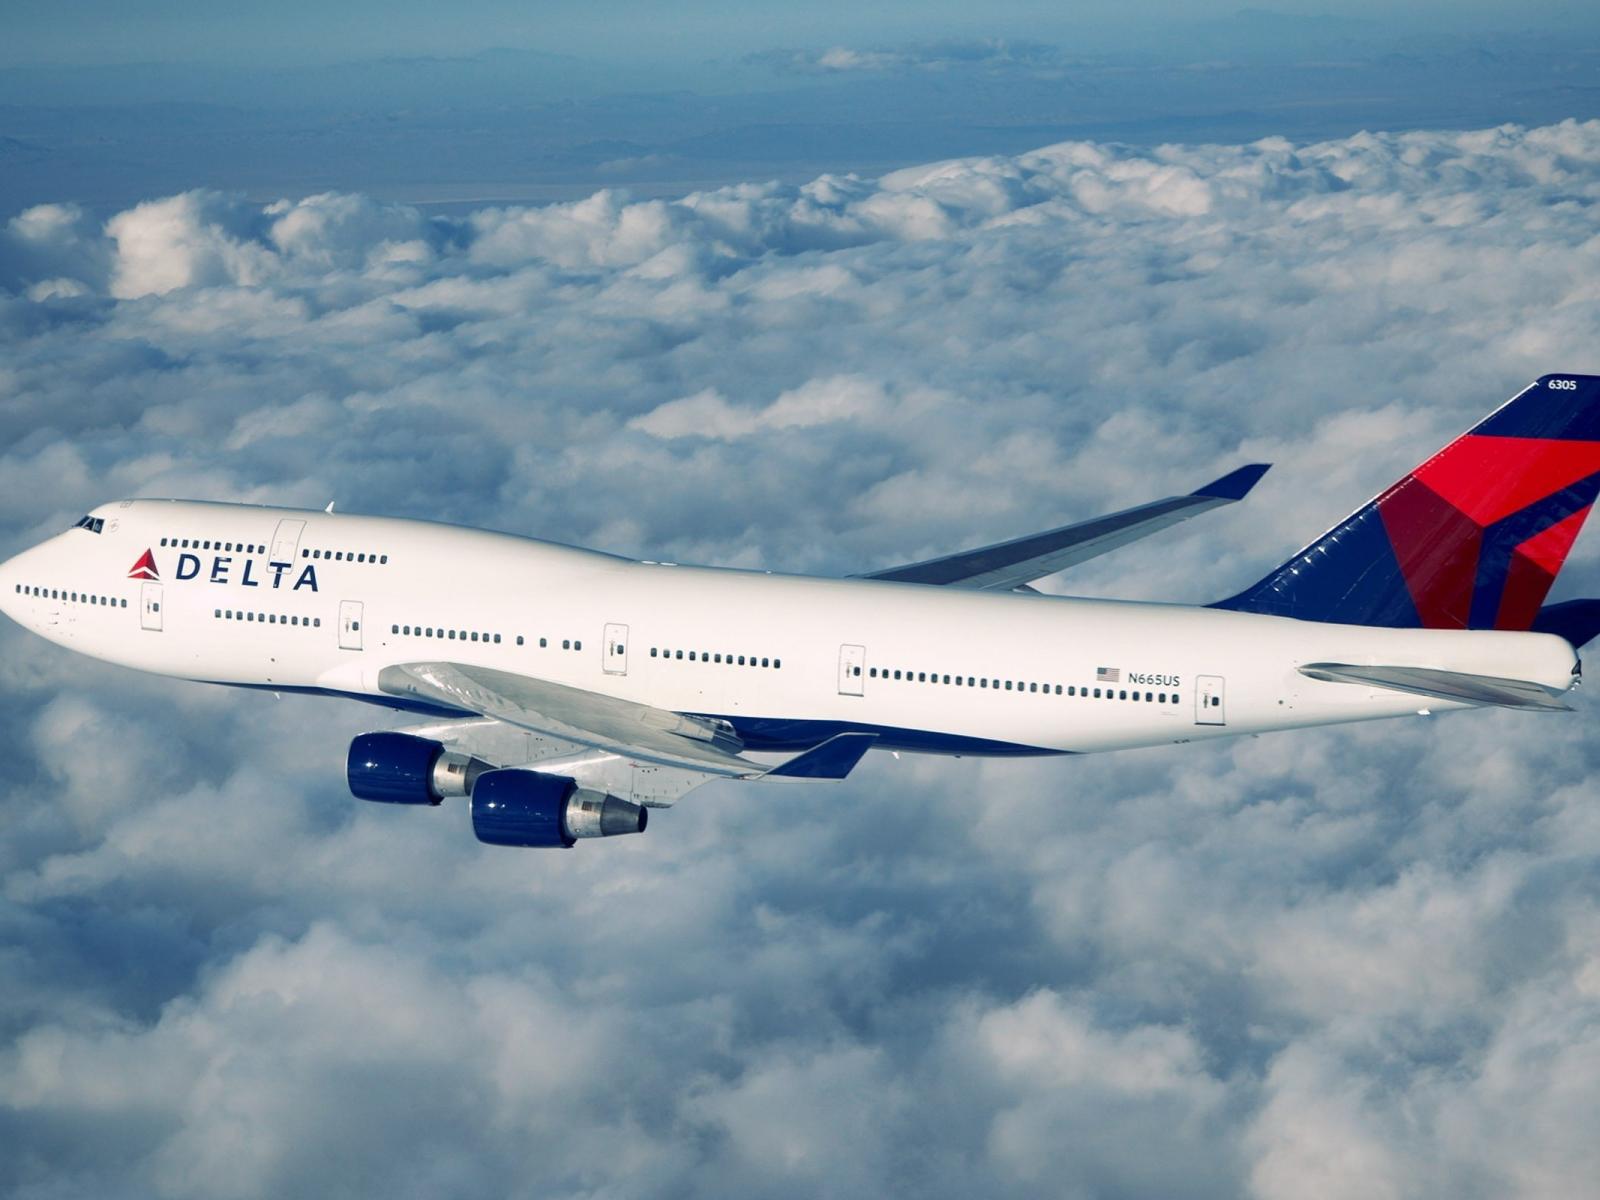 Boeing Airliners Widescreen Delta Airlines Wallpaper